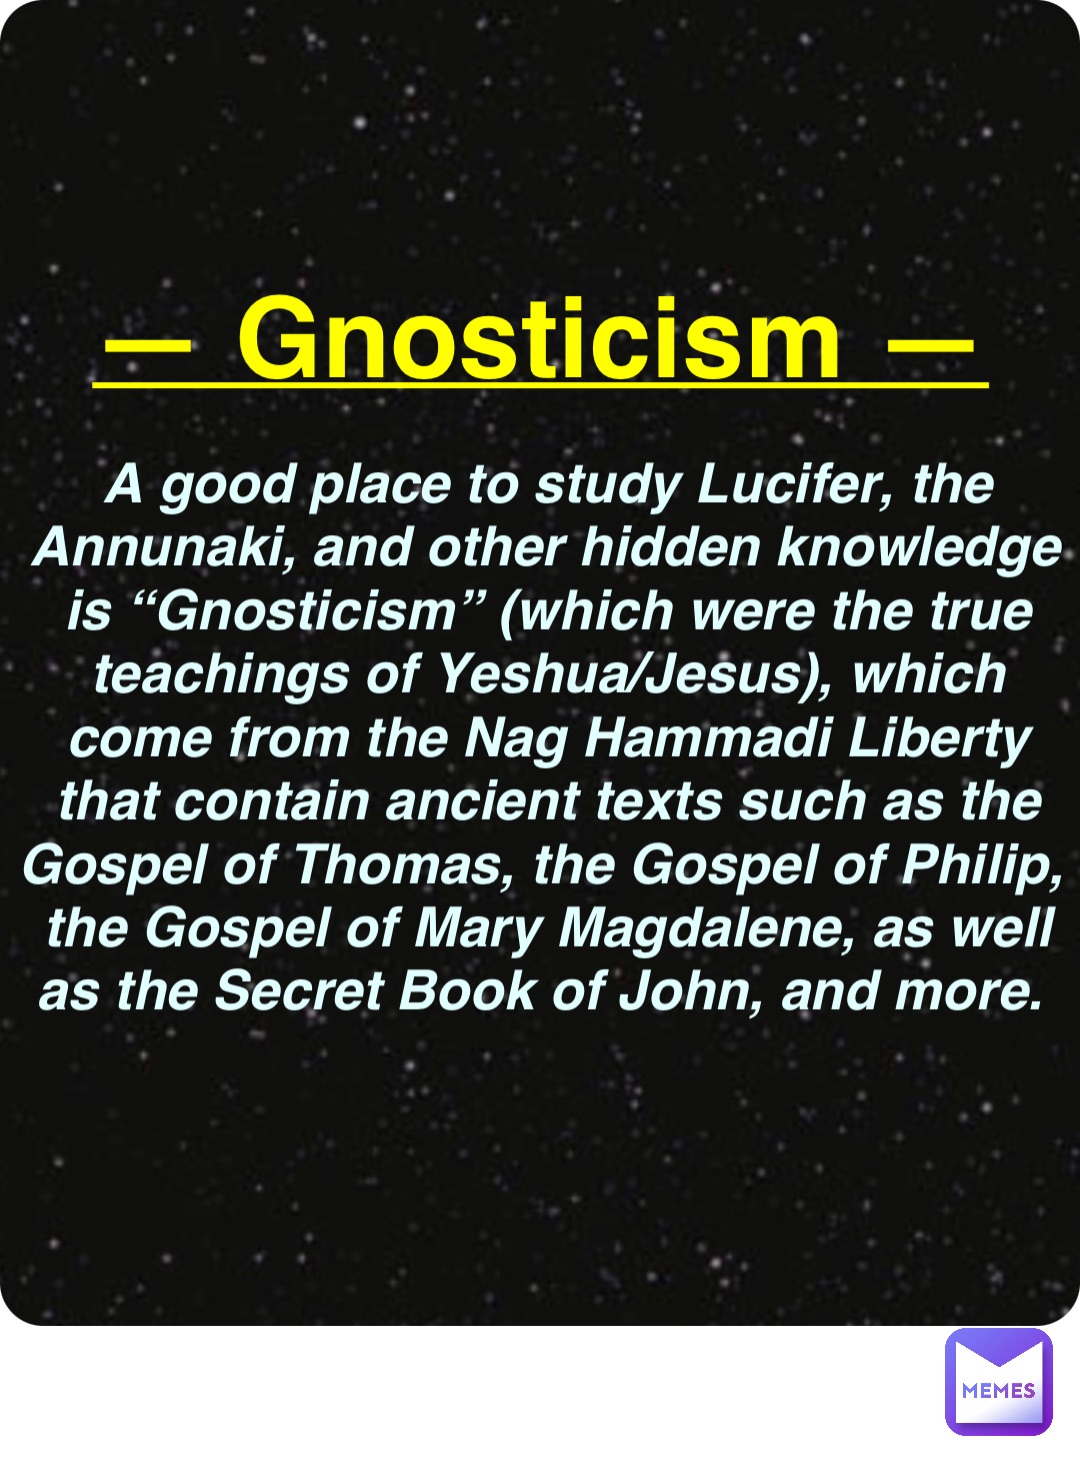 Double tap to edit — Gnosticism — A good place to study Lucifer, the Annunaki, and other hidden knowledge is “Gnosticism” (which were the true teachings of Yeshua/Jesus), which come from the Nag Hammadi Liberty that contain ancient texts such as the Gospel of Thomas, the Gospel of Philip, the Gospel of Mary Magdalene, as well as the Secret Book of John, and more.